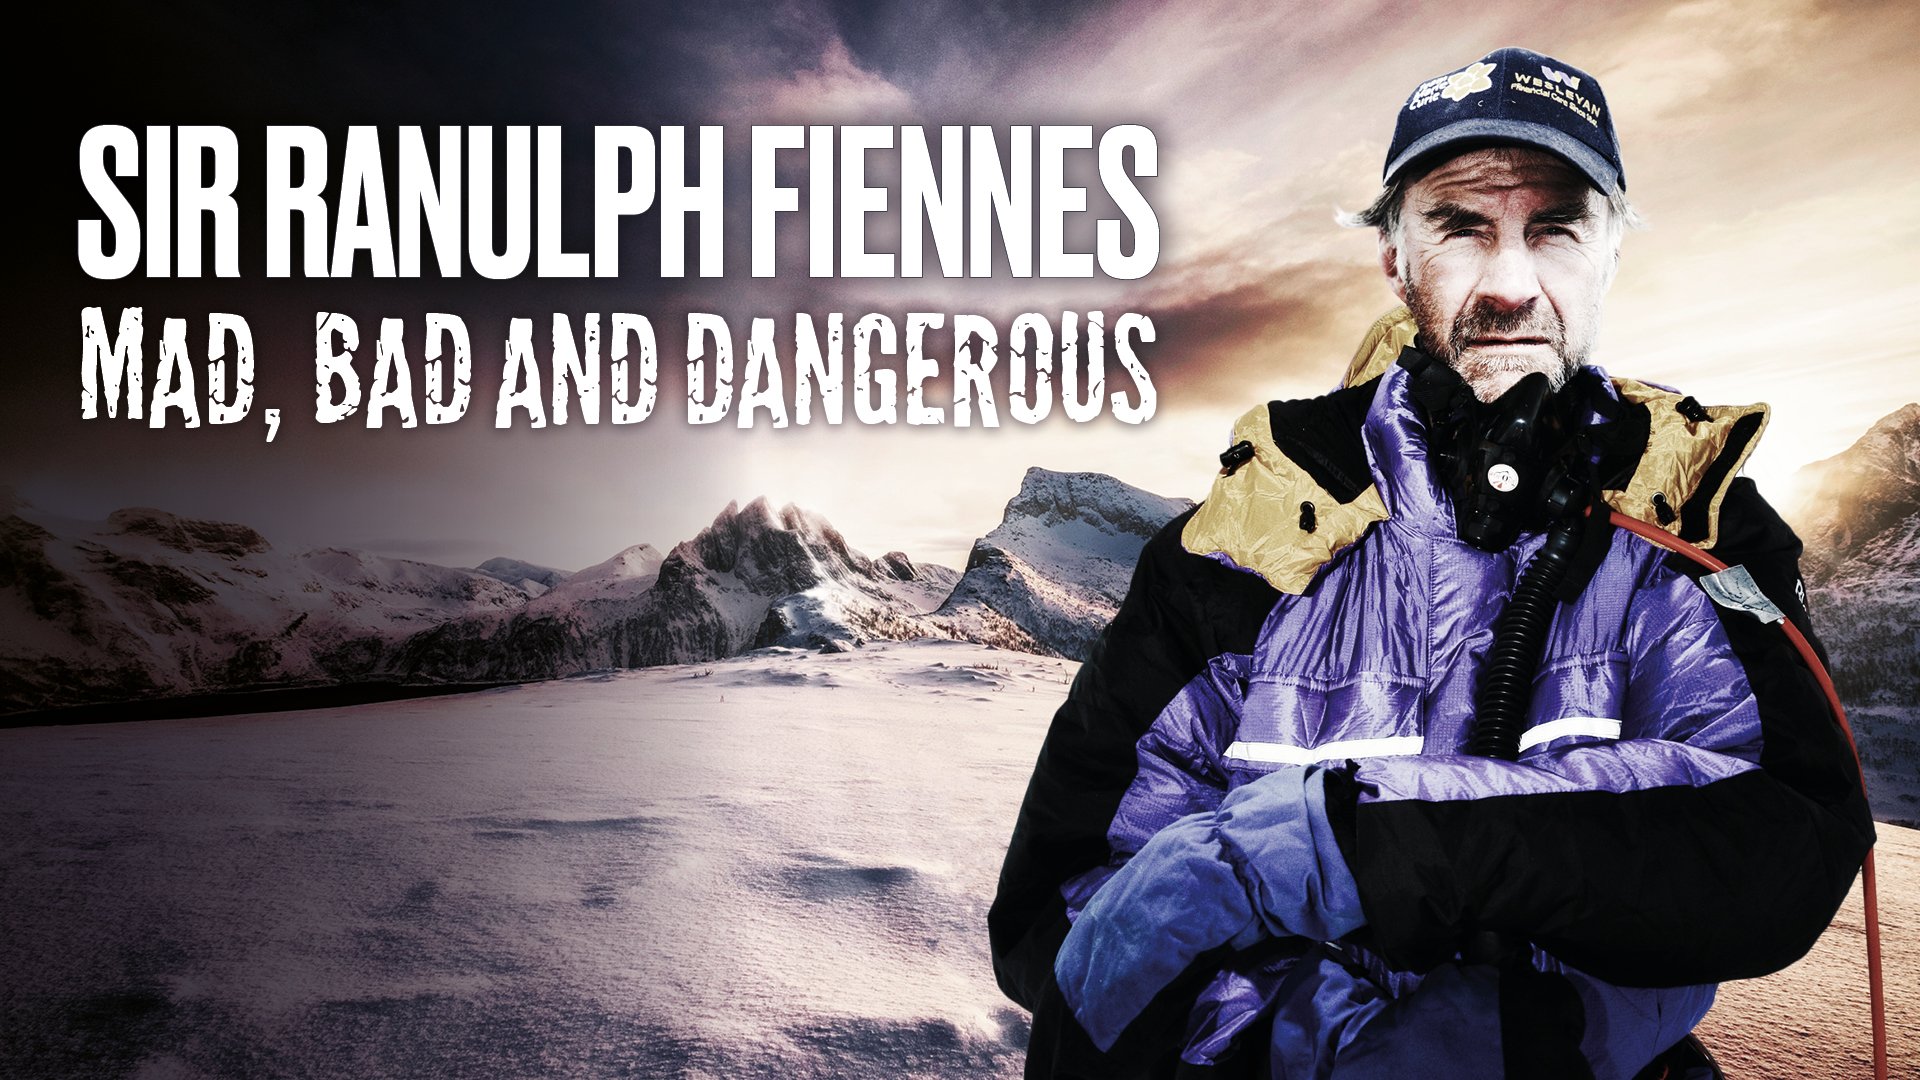 Sir Ranulph Fiennes: Mad, Bad and Dangerous Top Image